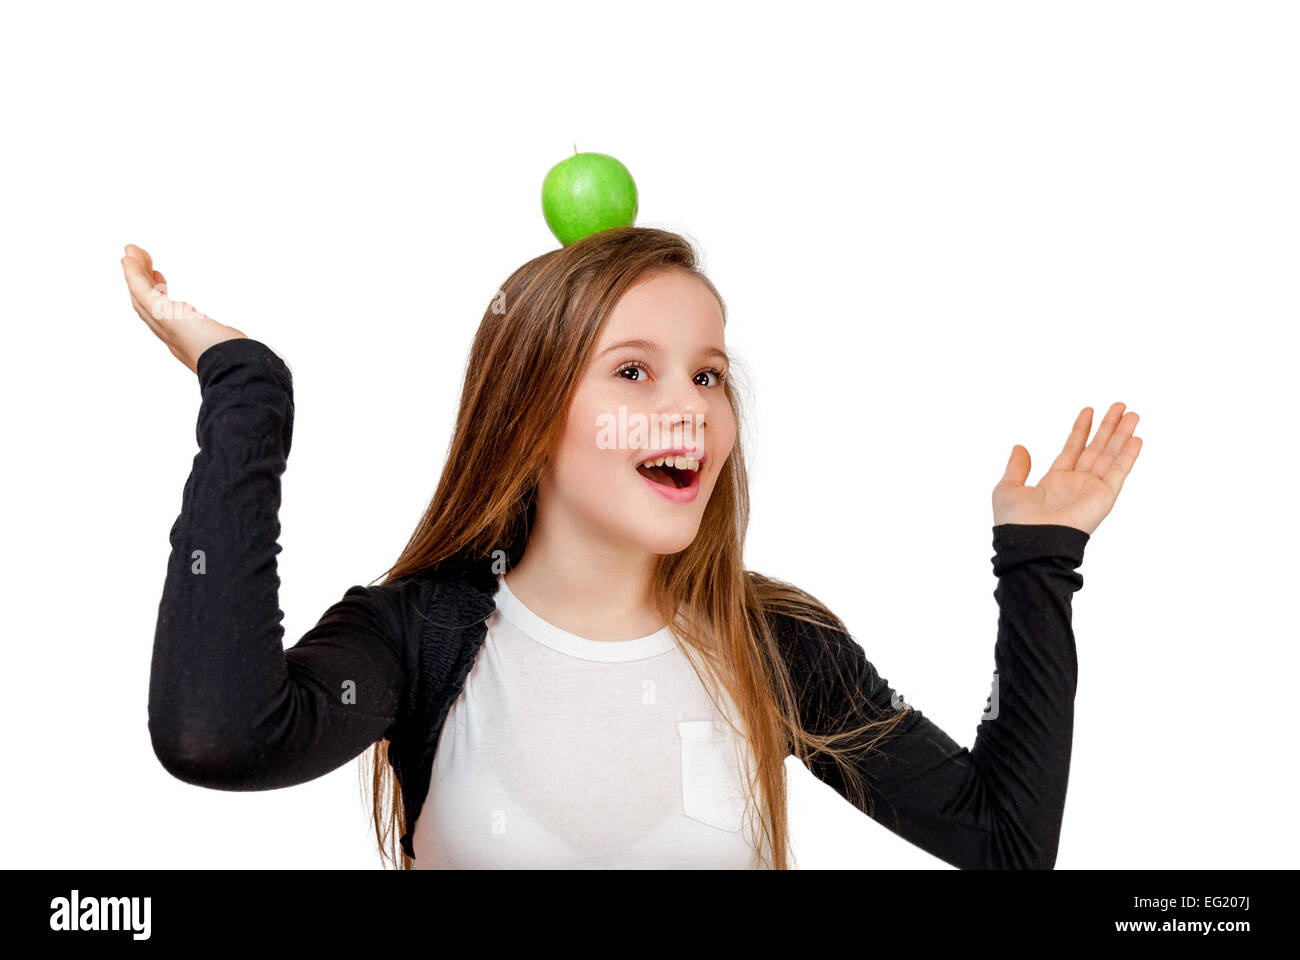 Little girl with green apple on head isolated on white Stock Photo